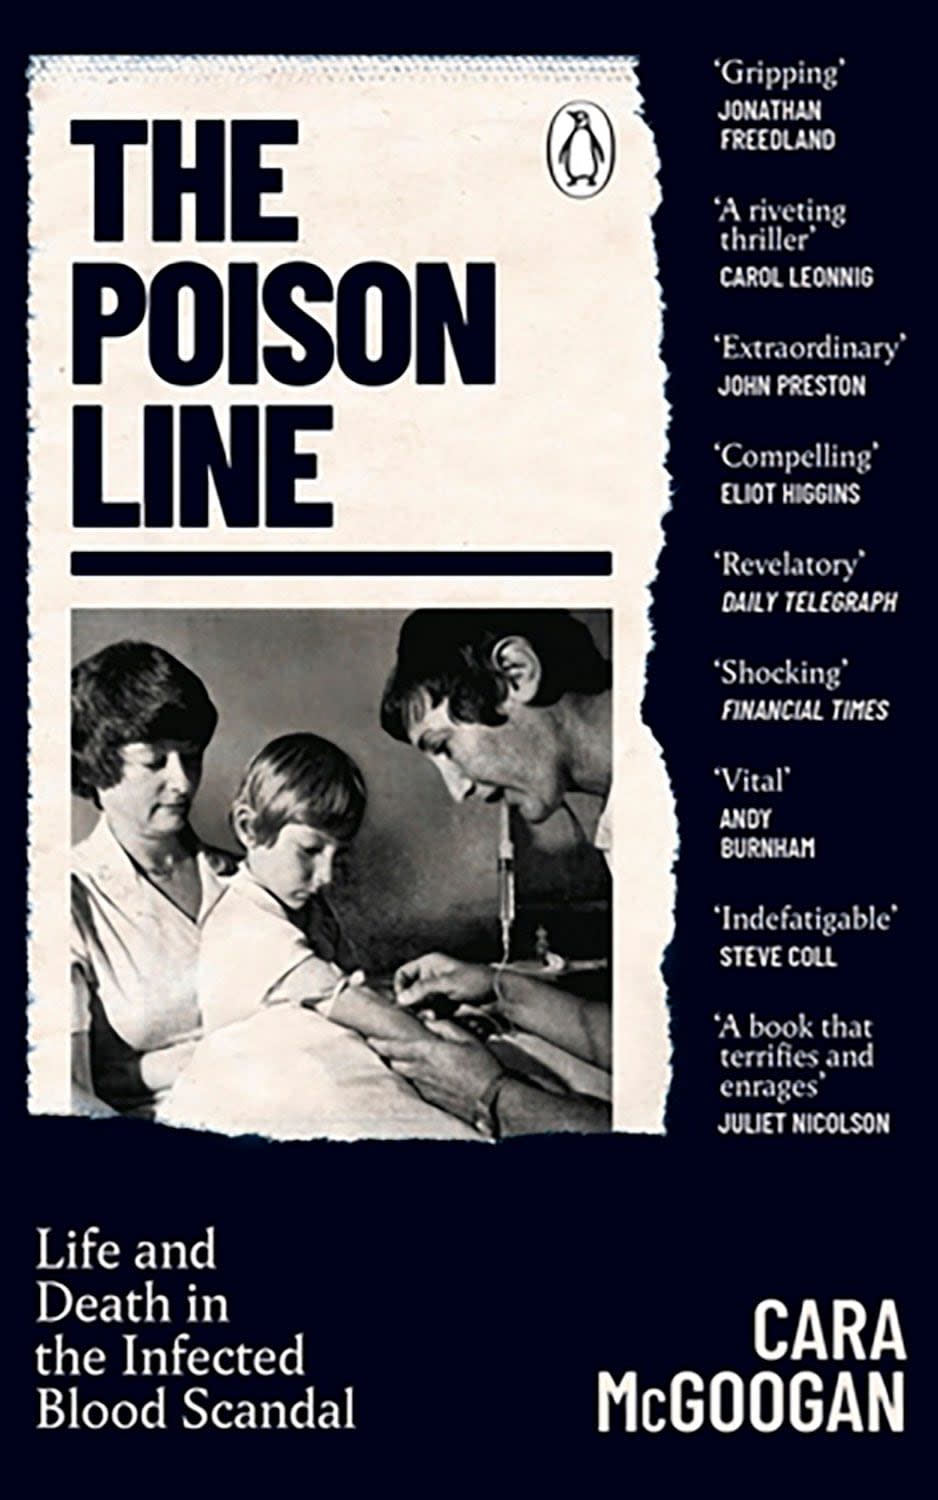 The Poison Line: Life and Death in the Infected Blood Scandal by Cara McGoogan is out now